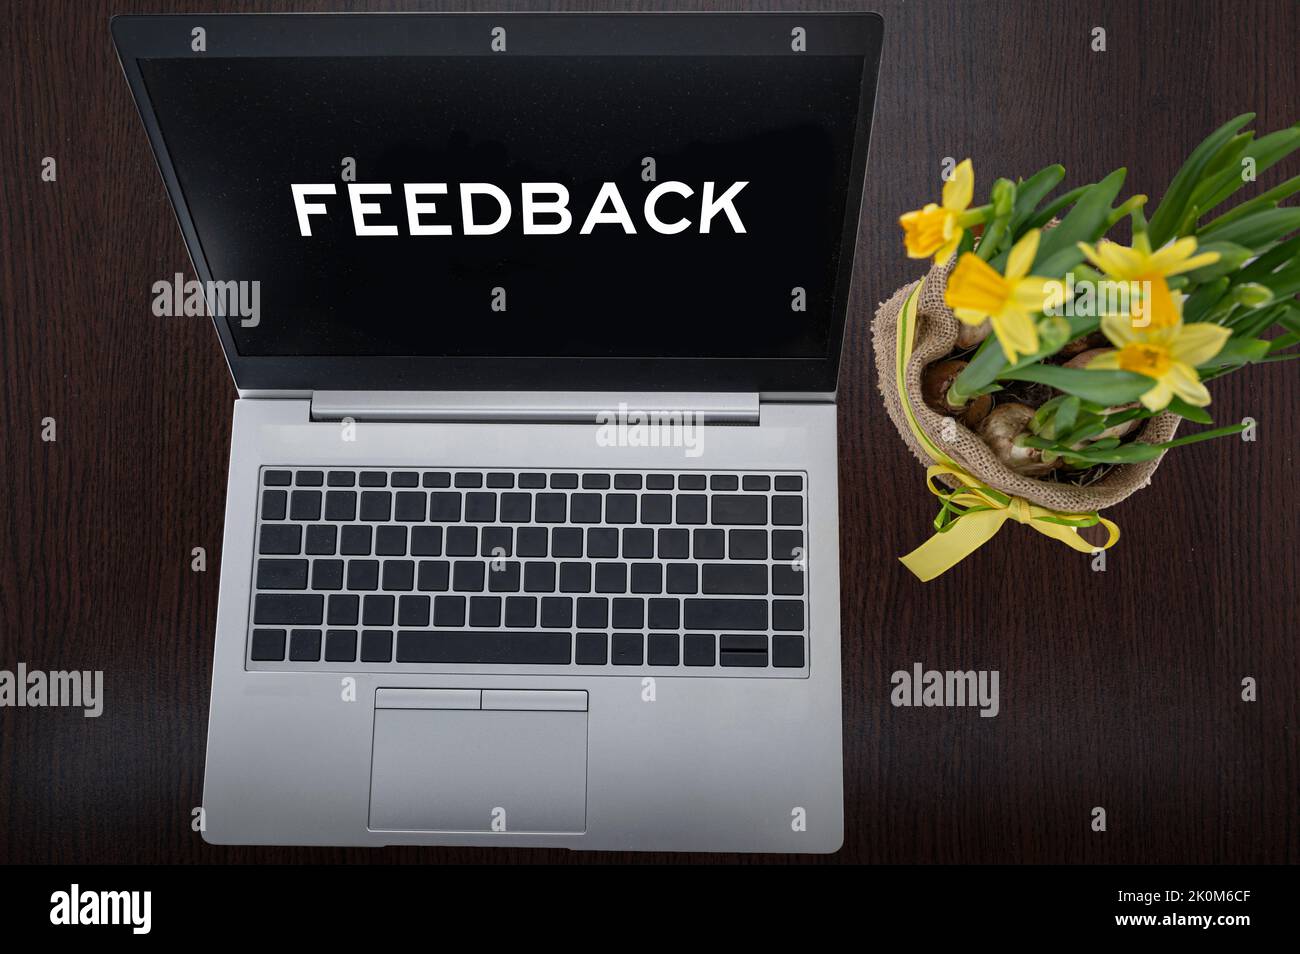 Top view of silver laptop with text feedback and plant on table. Stock Photo